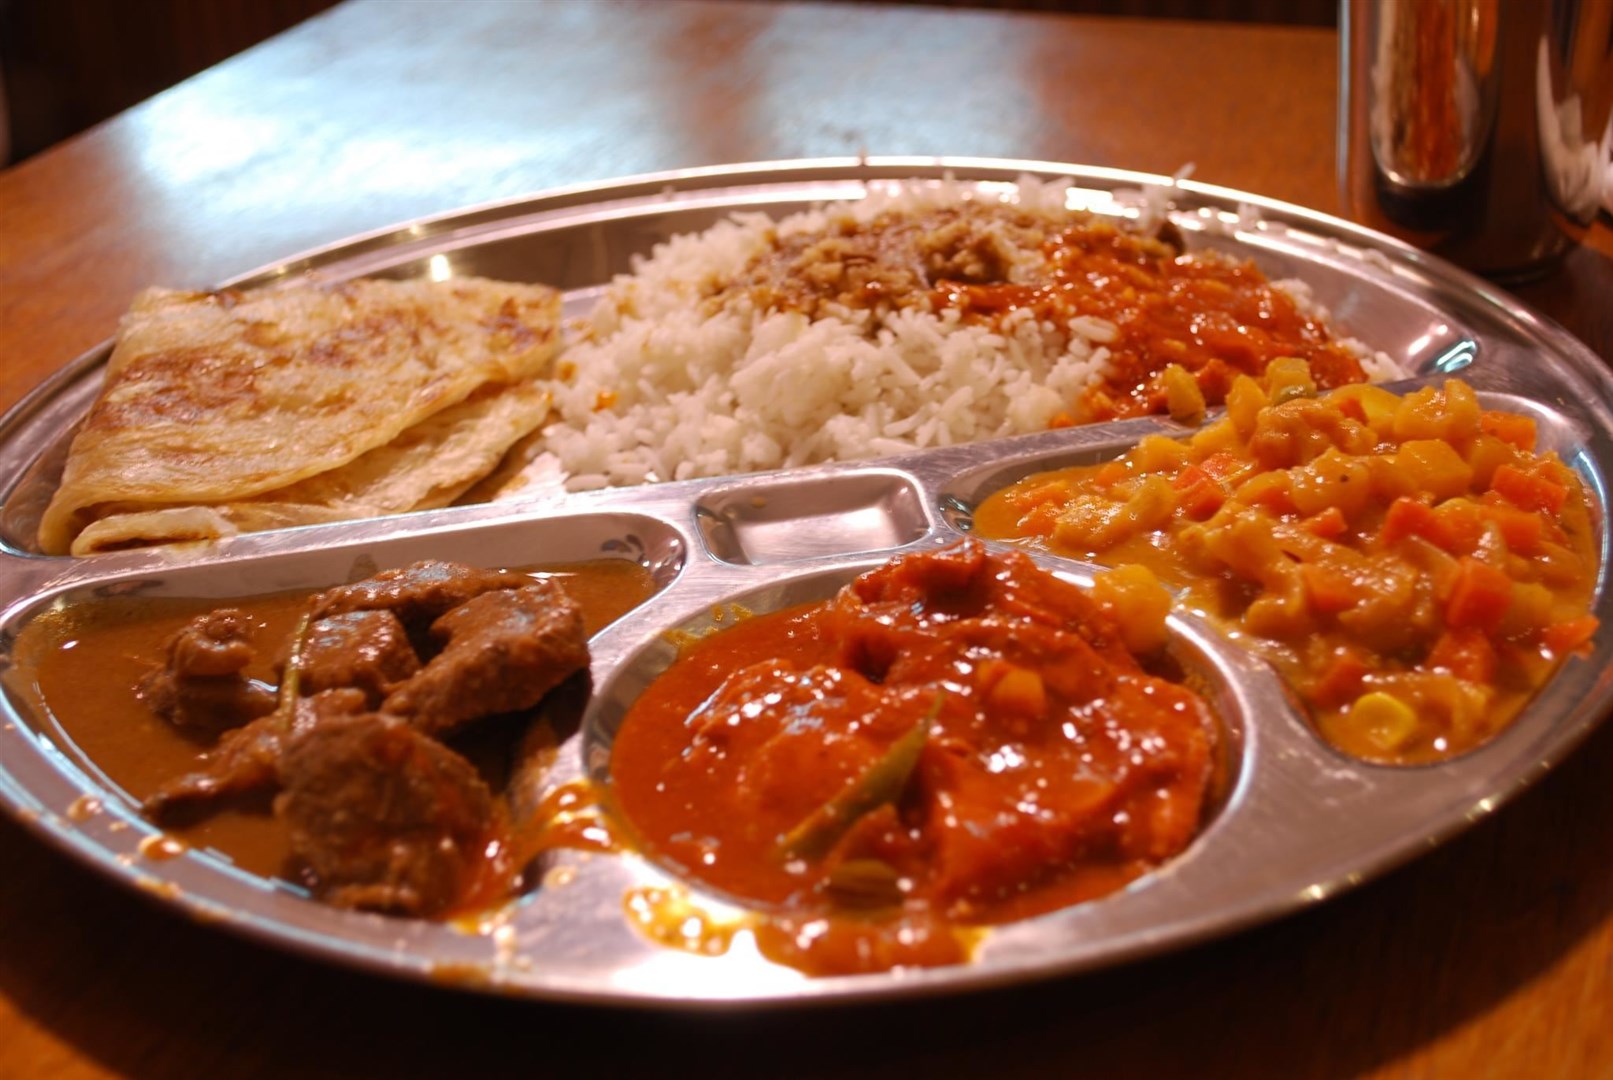 Spicy foods like curries can also cause indigestion. Picture: Alpha from Melbourne, Australia, via Wikimedia Commons.